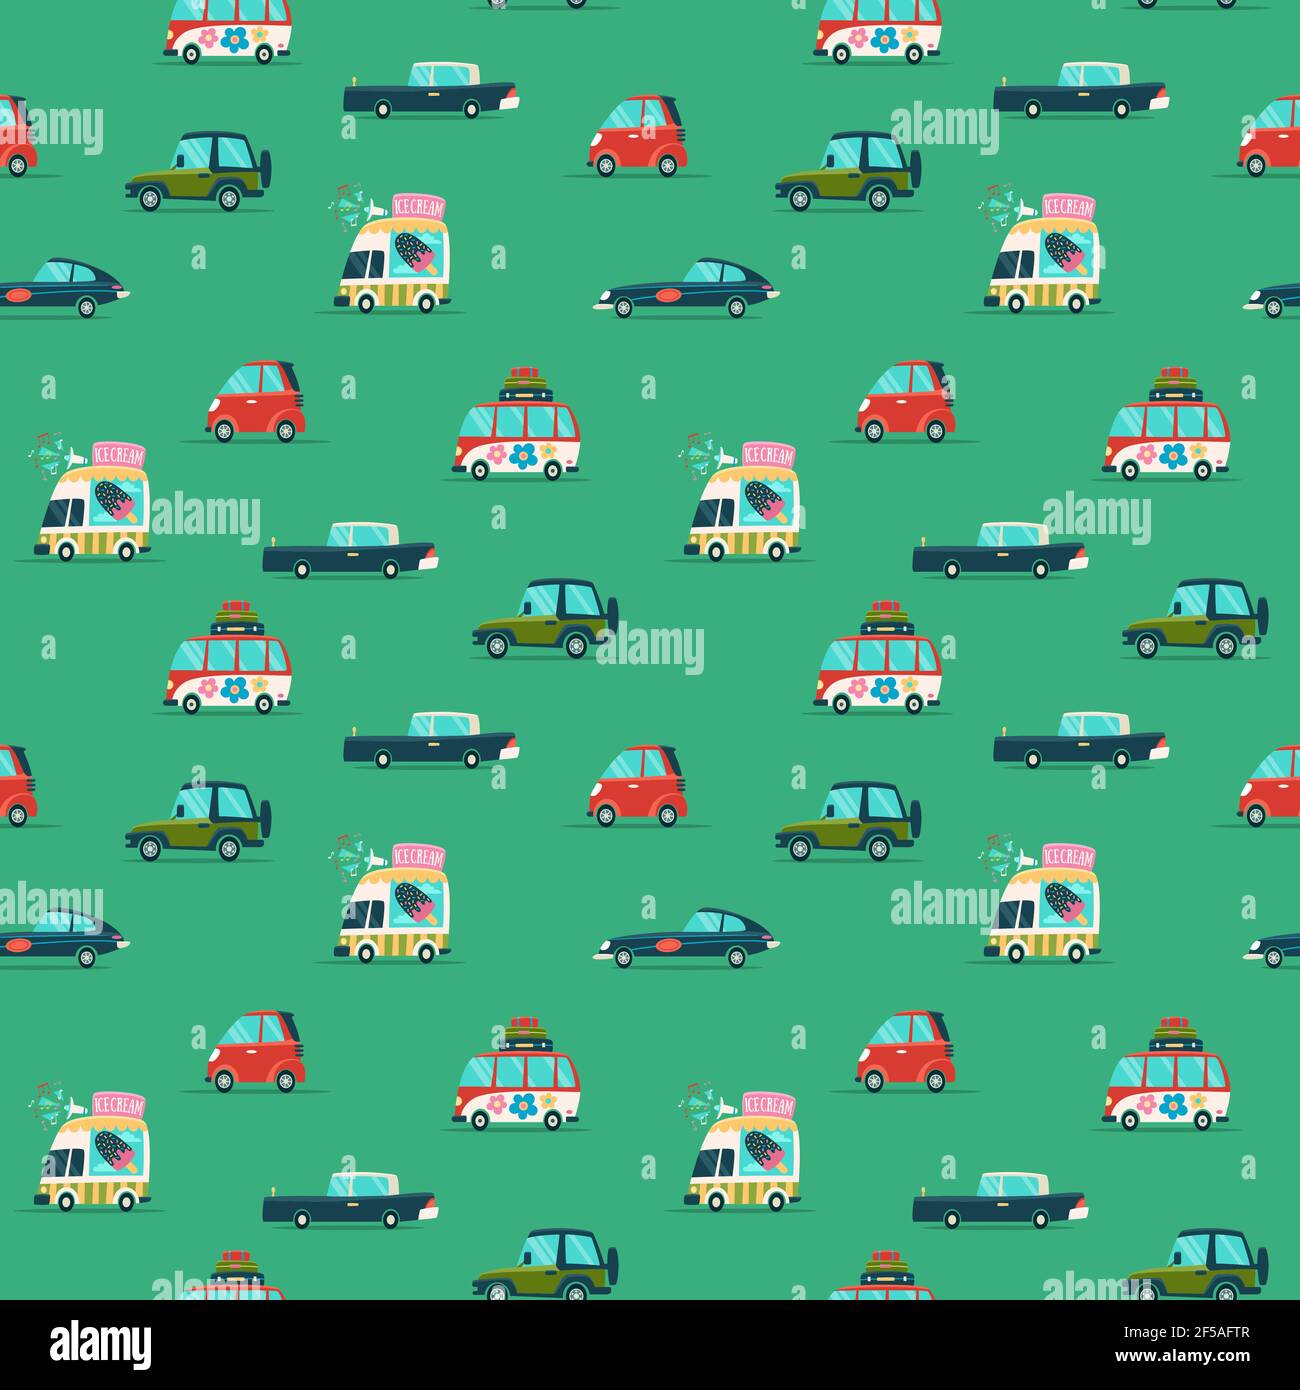 Vector car seamless pattern in flat style. Wrapping paper pattern. Simple Nursery Design ideal for Fabric, Textile, Wrapping Paper. Stock Vector